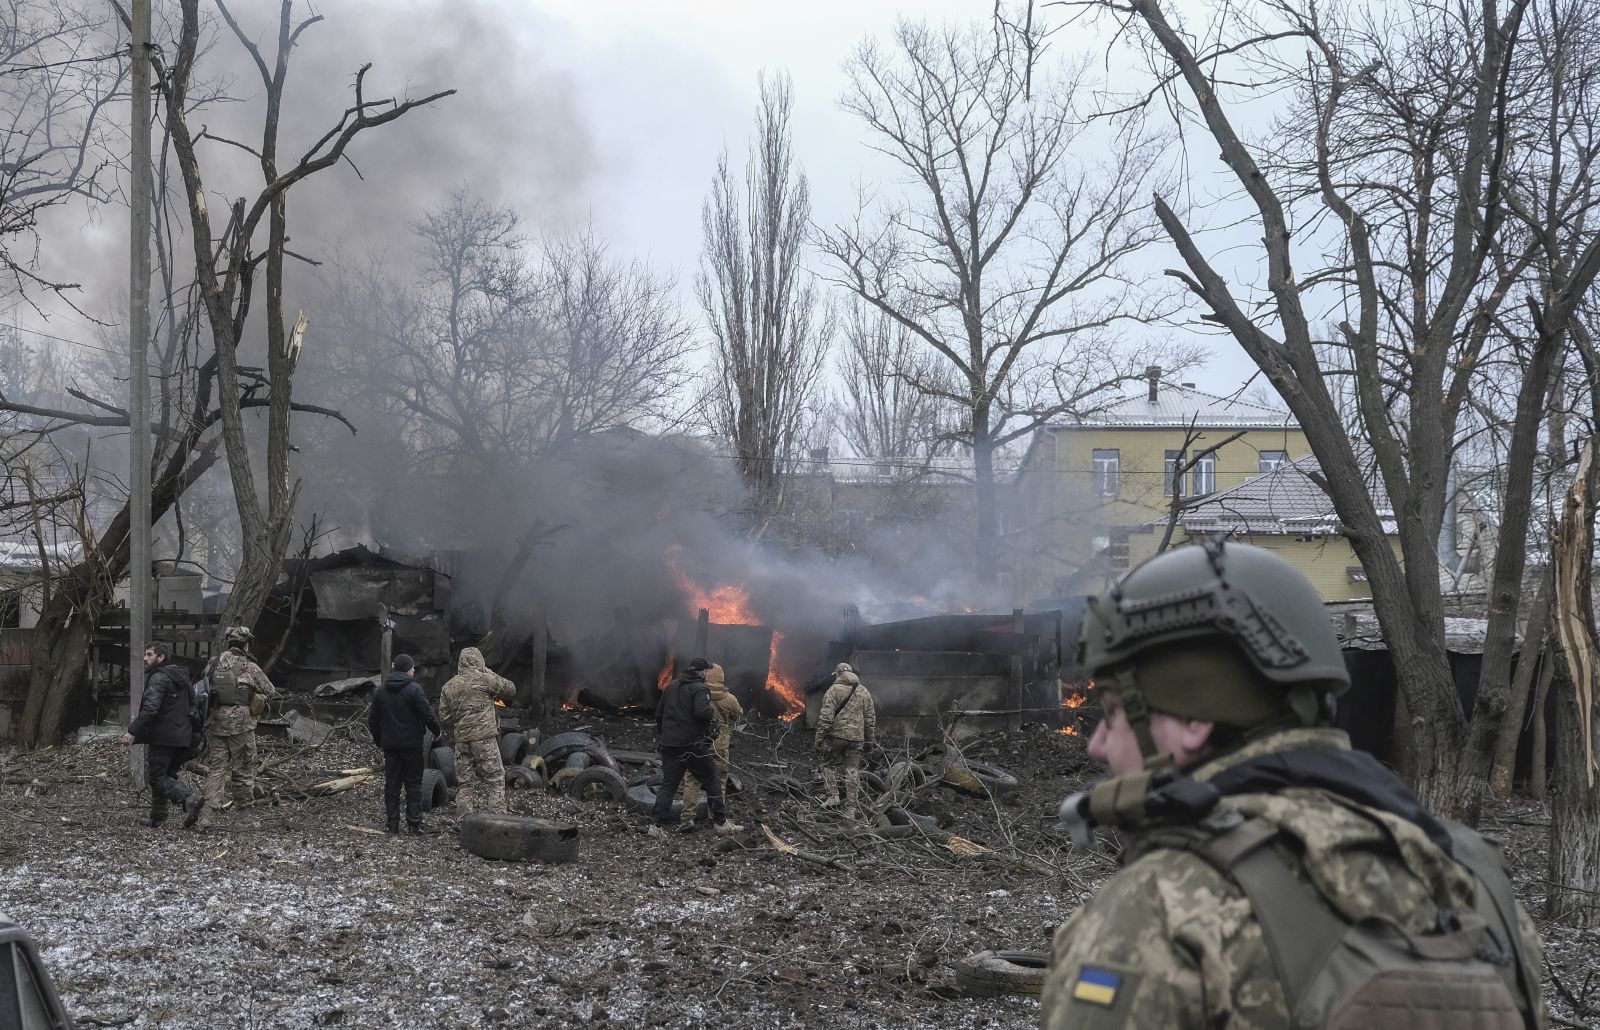 epa10444413 Ukrainian rescuers work at the site of a rocket attack on a residential area in Kramatorsk, Donetsk region, eastern Ukraine, 02 February 2023, amid Russia's invasion. At least five people were injured after two rockets hit on the day a residential area in Kramatorsk, the head of Ukraine's Donetsk Regional Military Administration, Pavlo Kyrylenko said in a statement. The rockets hit an area near the site of overnight shelling on a four-story residential building, where at least three people were killed and 18 others injured, according to the State Emergency Service of Ukraine (SES). Russian troops entered Ukraine territory on 24 February 2022 starting a conflict that has provoked destruction and a humanitarian crisis.  EPA/SERGEY SHESTAK